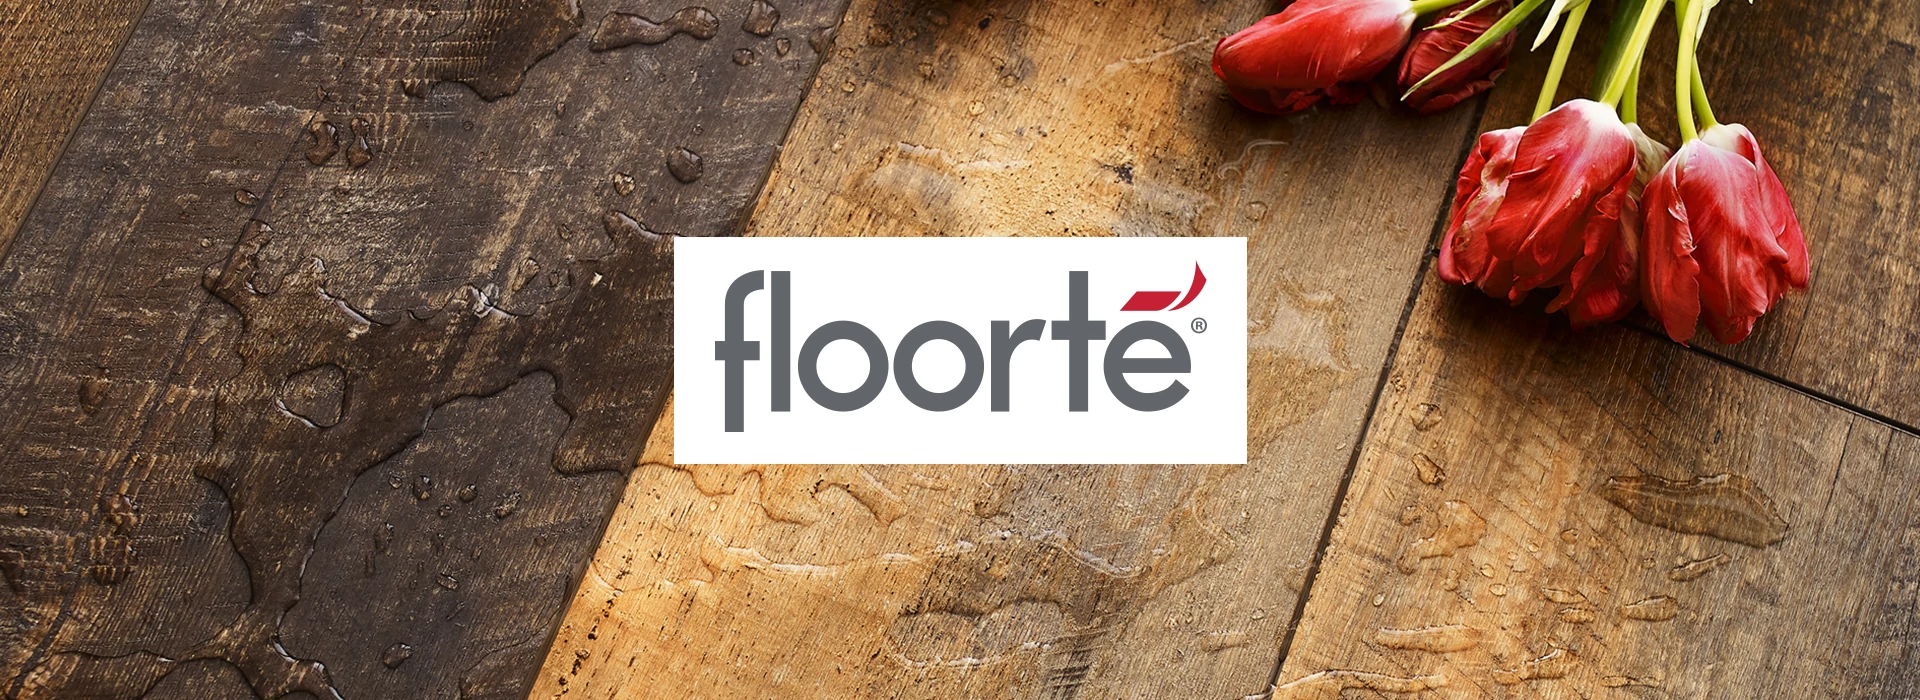 Floorté waterproof flooring with a spilled vase and flowers on it